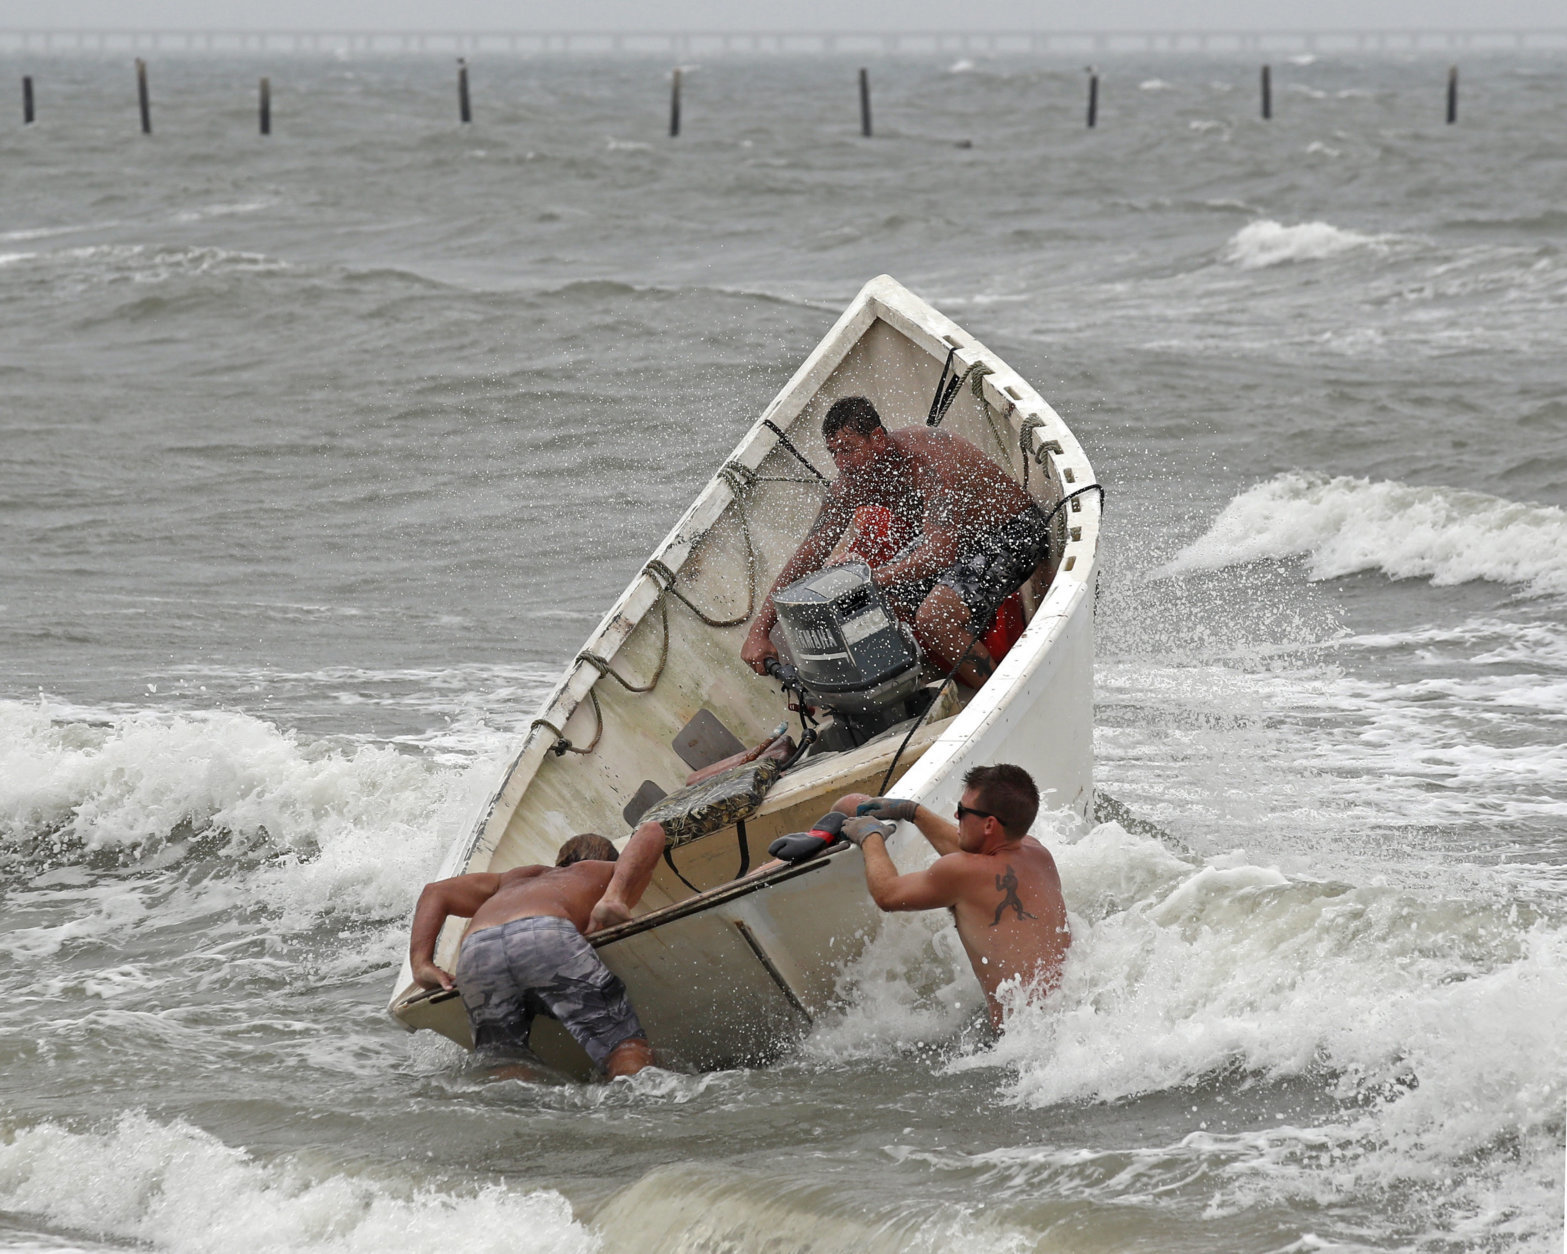 Fishermen launch a boat as they attempt to recover their haul-seine fishing net, Thursday, Sept. 13, 2018, in Virginia Beach, Va., as Hurricane Florence moves towards the eastern shore. (AP Photo/Alex Brandon)